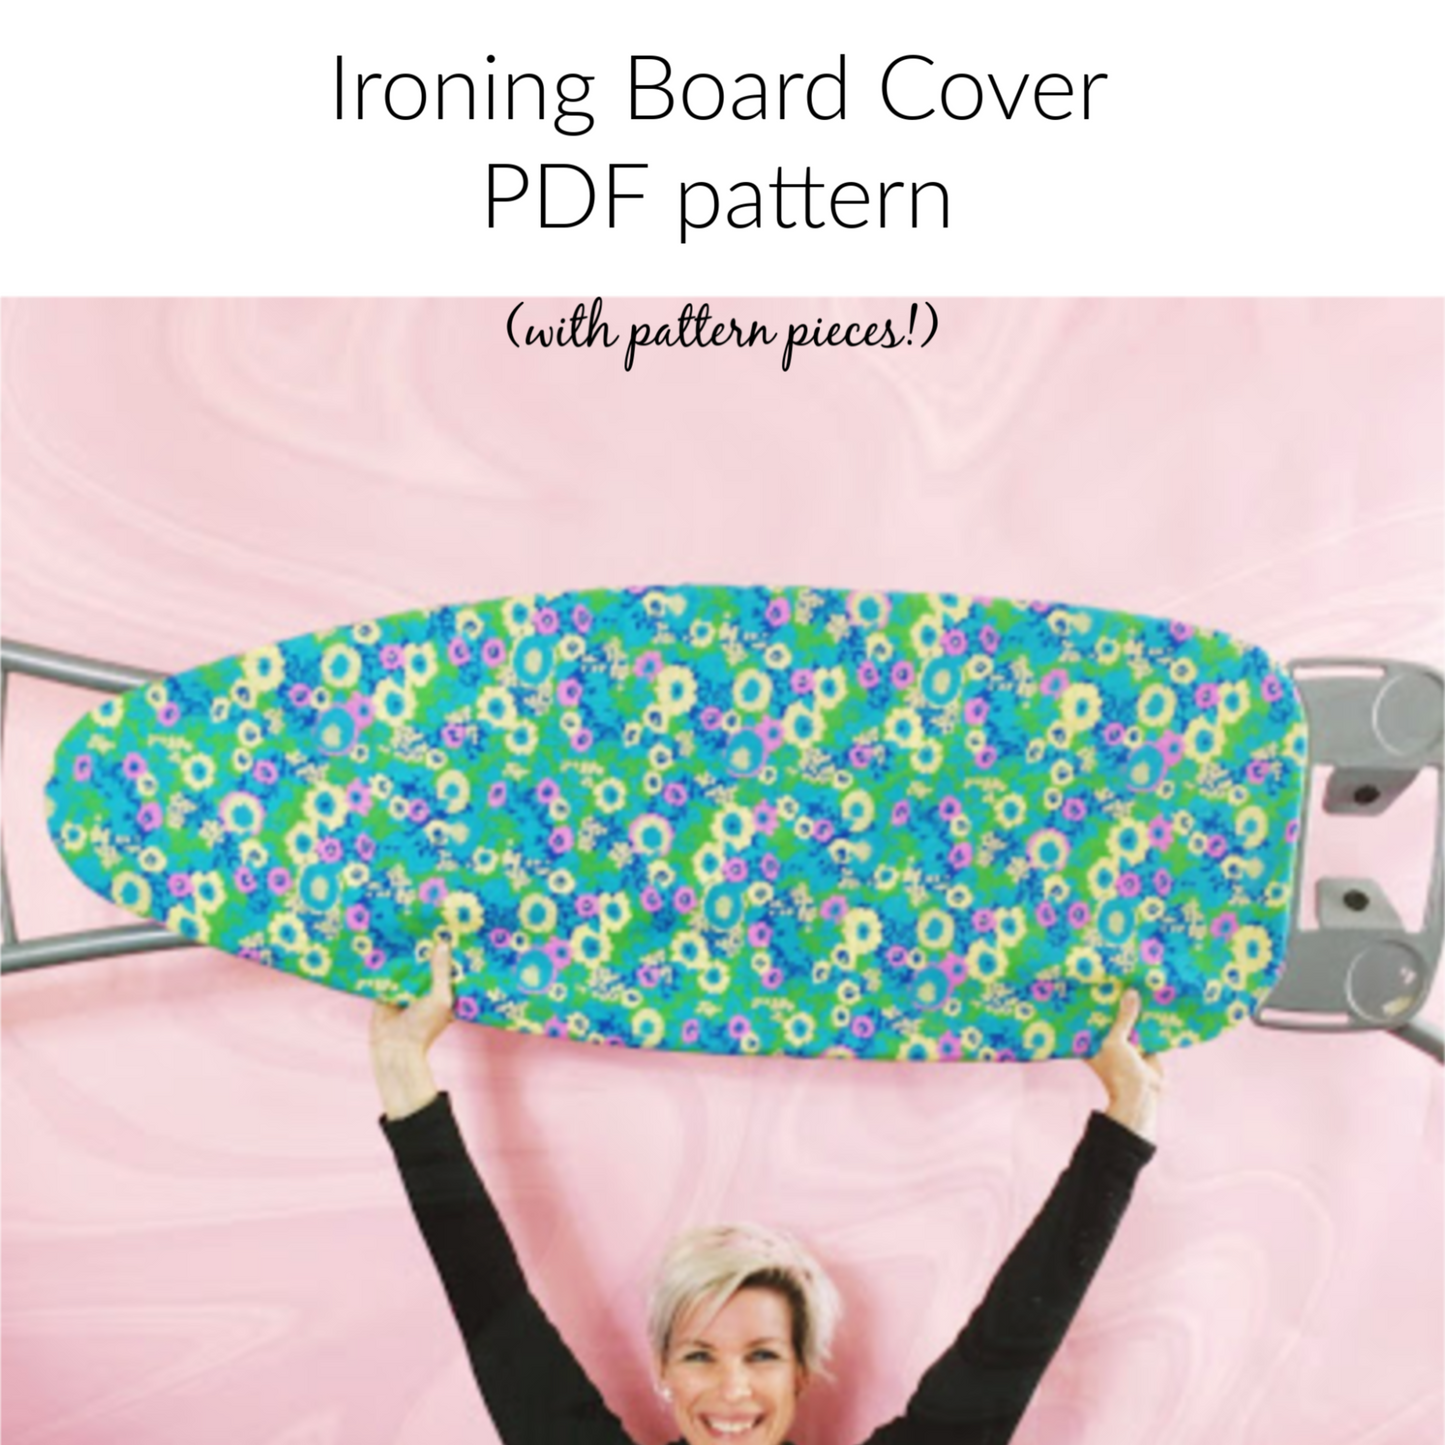 Ironing Board Cover PDF